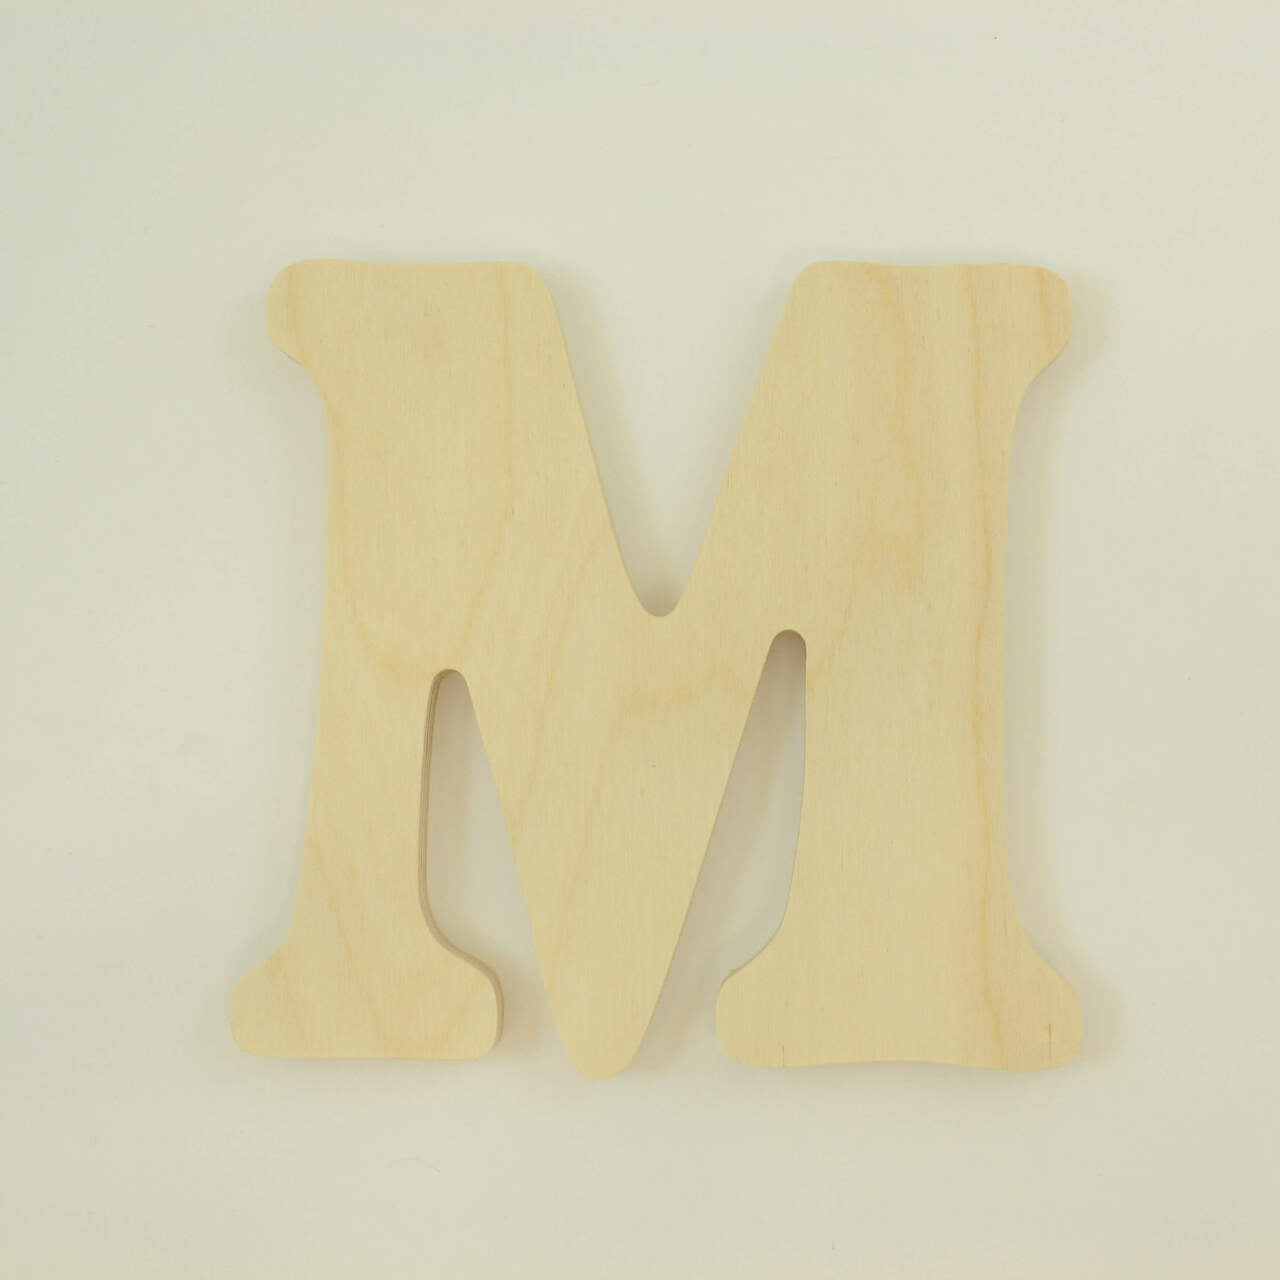 J Style 4 Inch DIY Wooden Letters for Crafts Easter Alphabet Letters for Table Decoration Paintable Decorative Letters Standing Letters Slices Sign Board Decoration for Craft Home Party Projects 